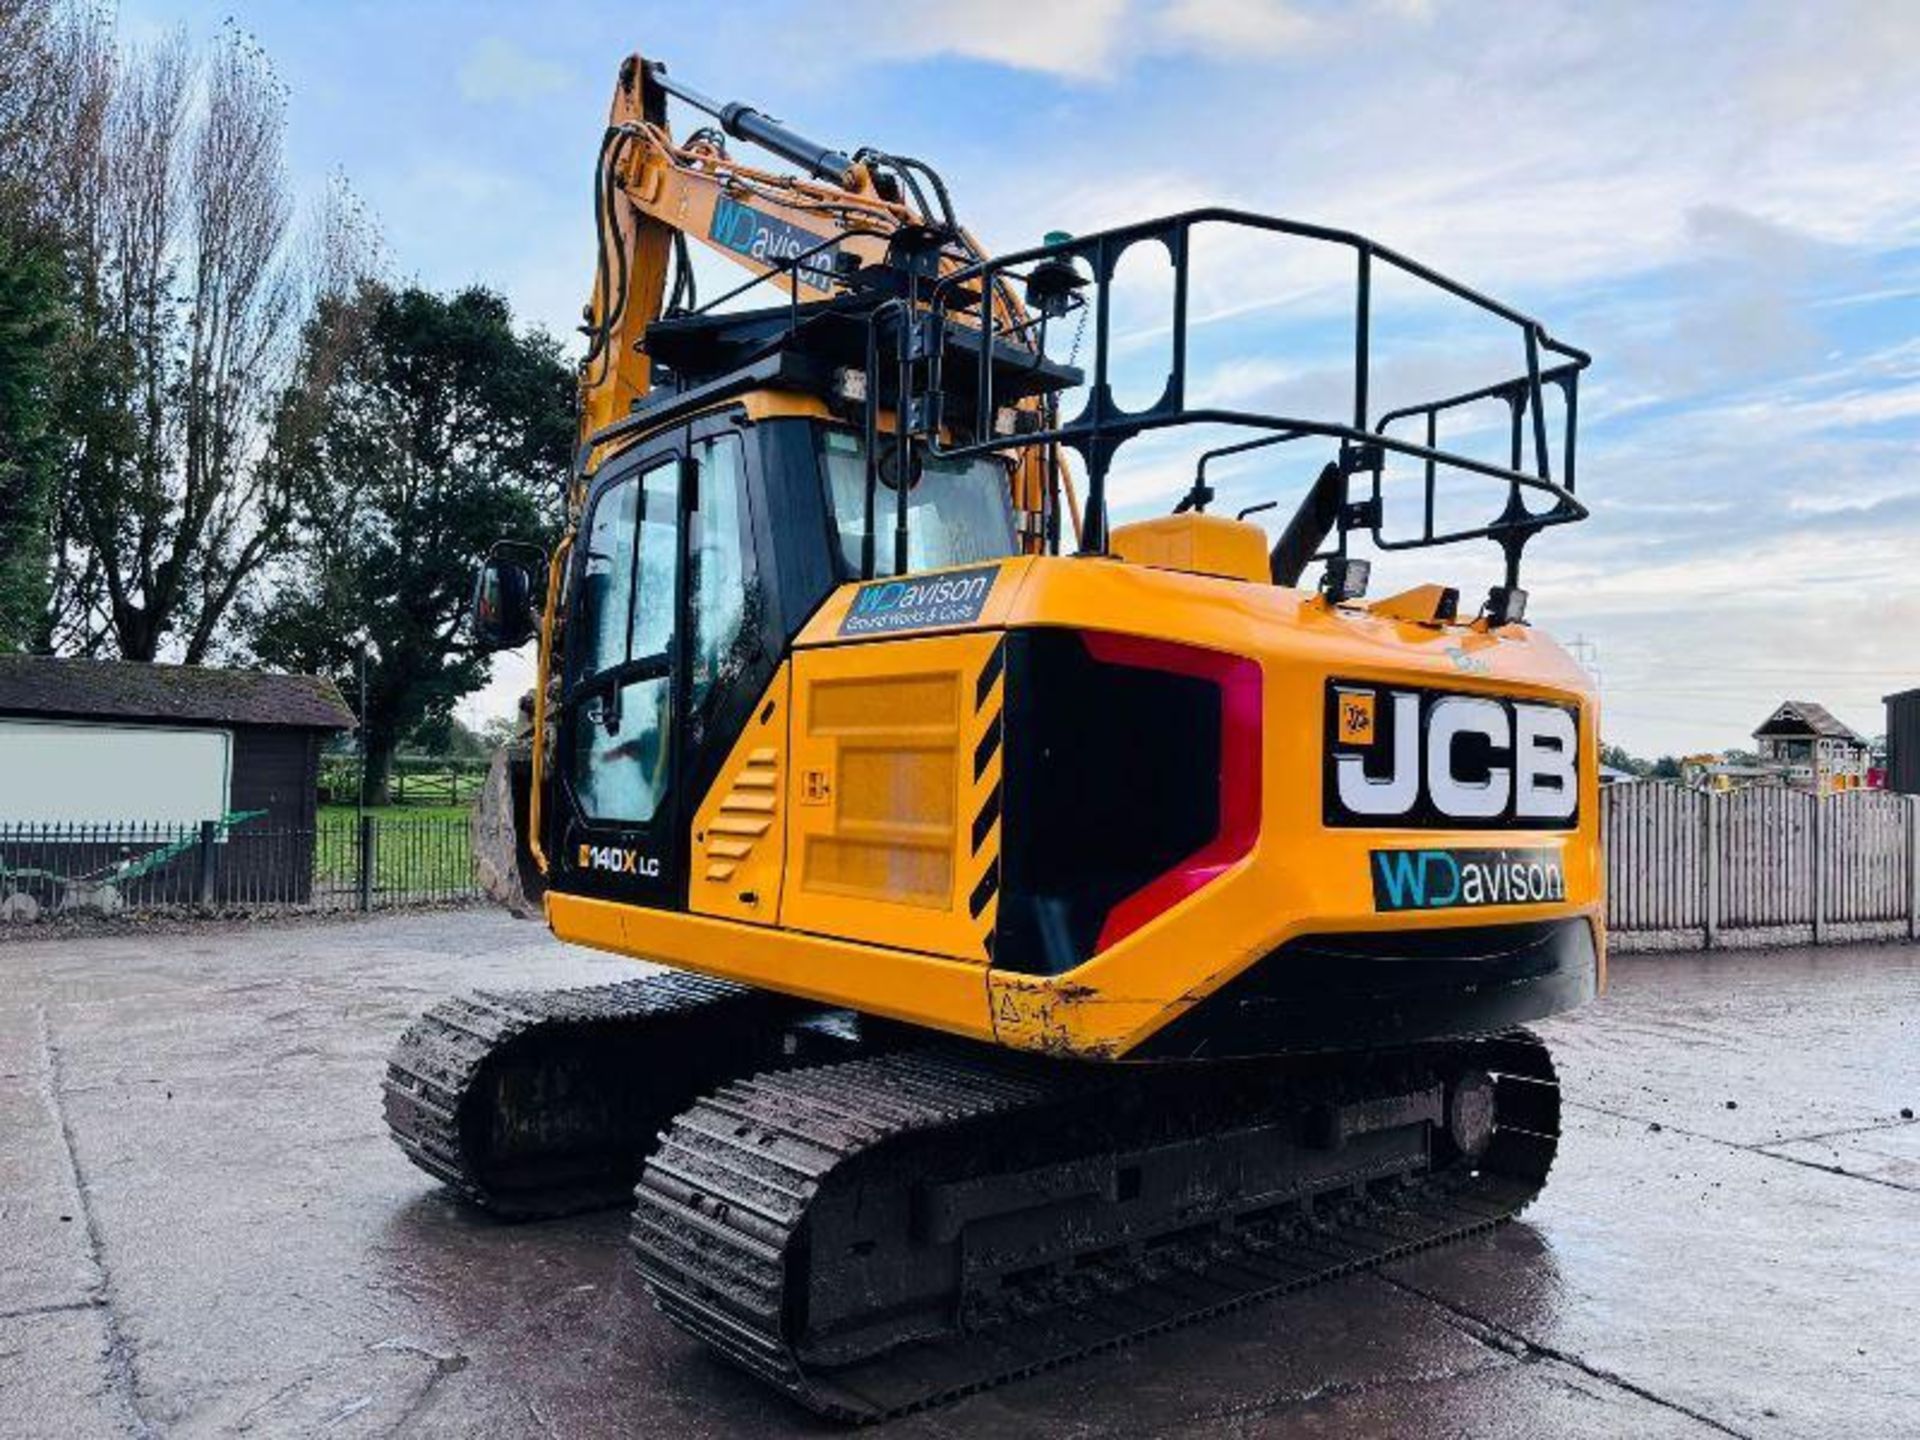 JCB 140XLC TRACKED EXCAVATOR *YEAR 2020, 3774 HOURS* C/W QUICK HITCH - Image 5 of 19